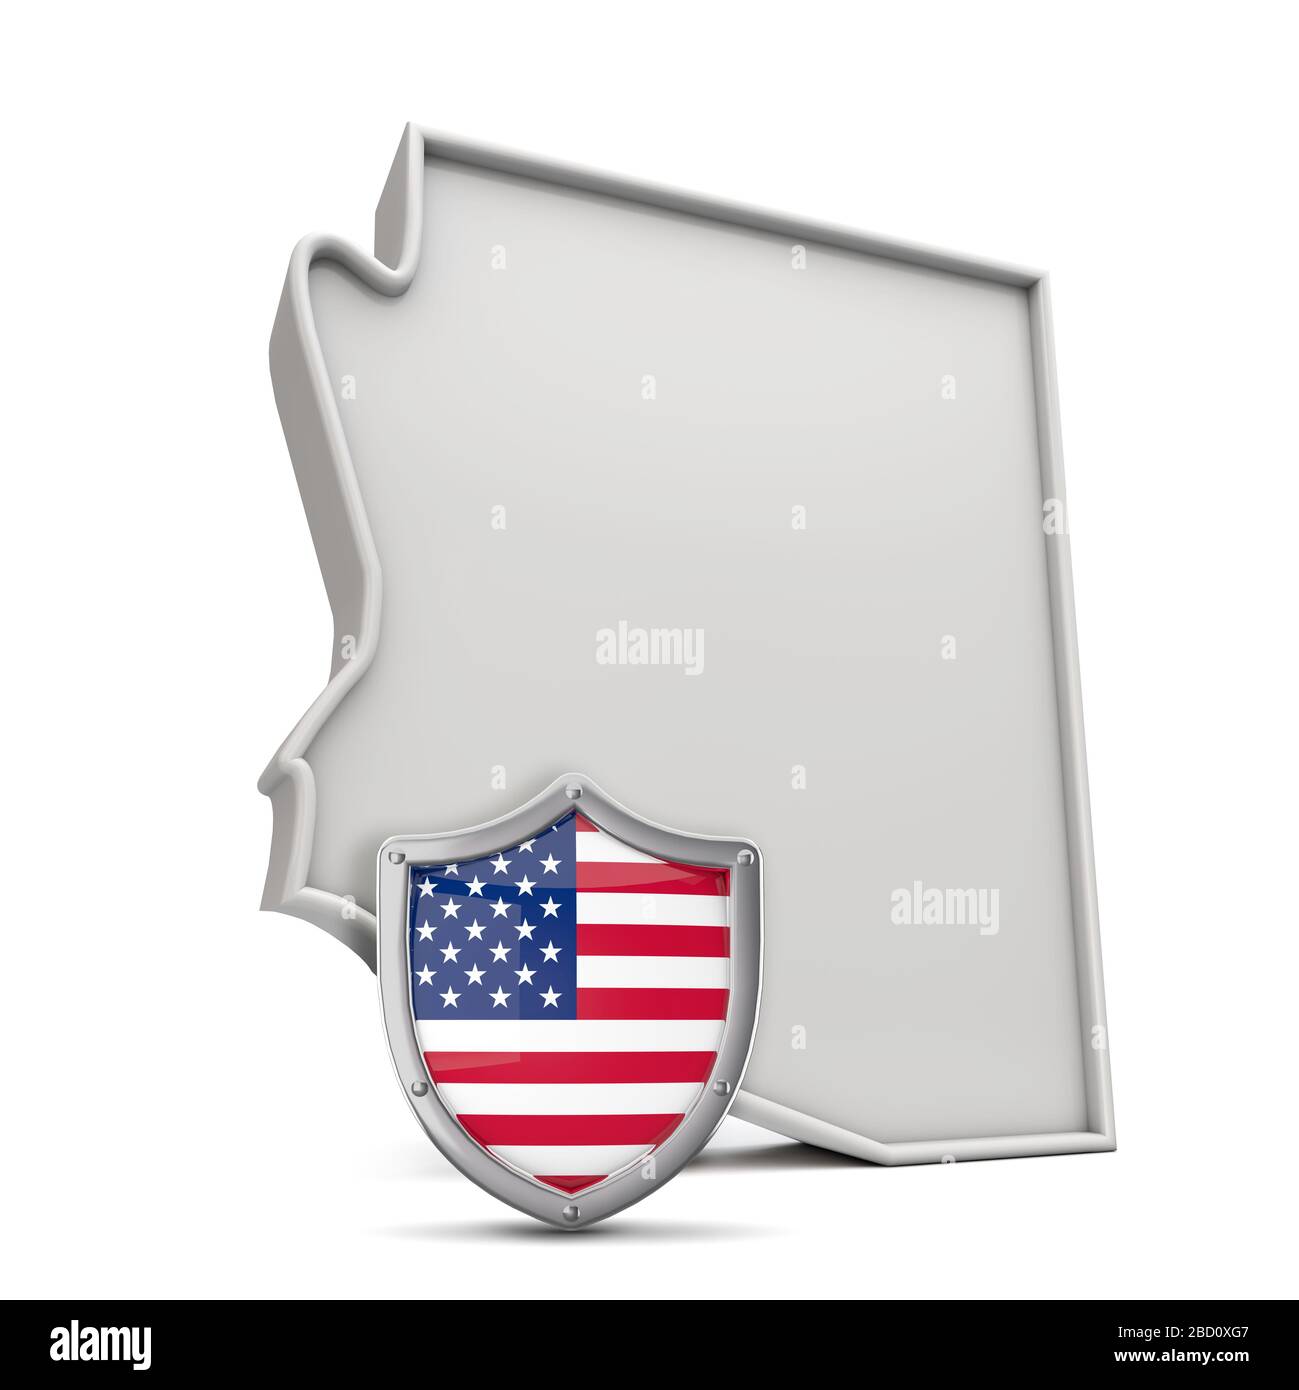 American state of Arizona, with stars and stripes shield. 3D Rendering Stock Photo